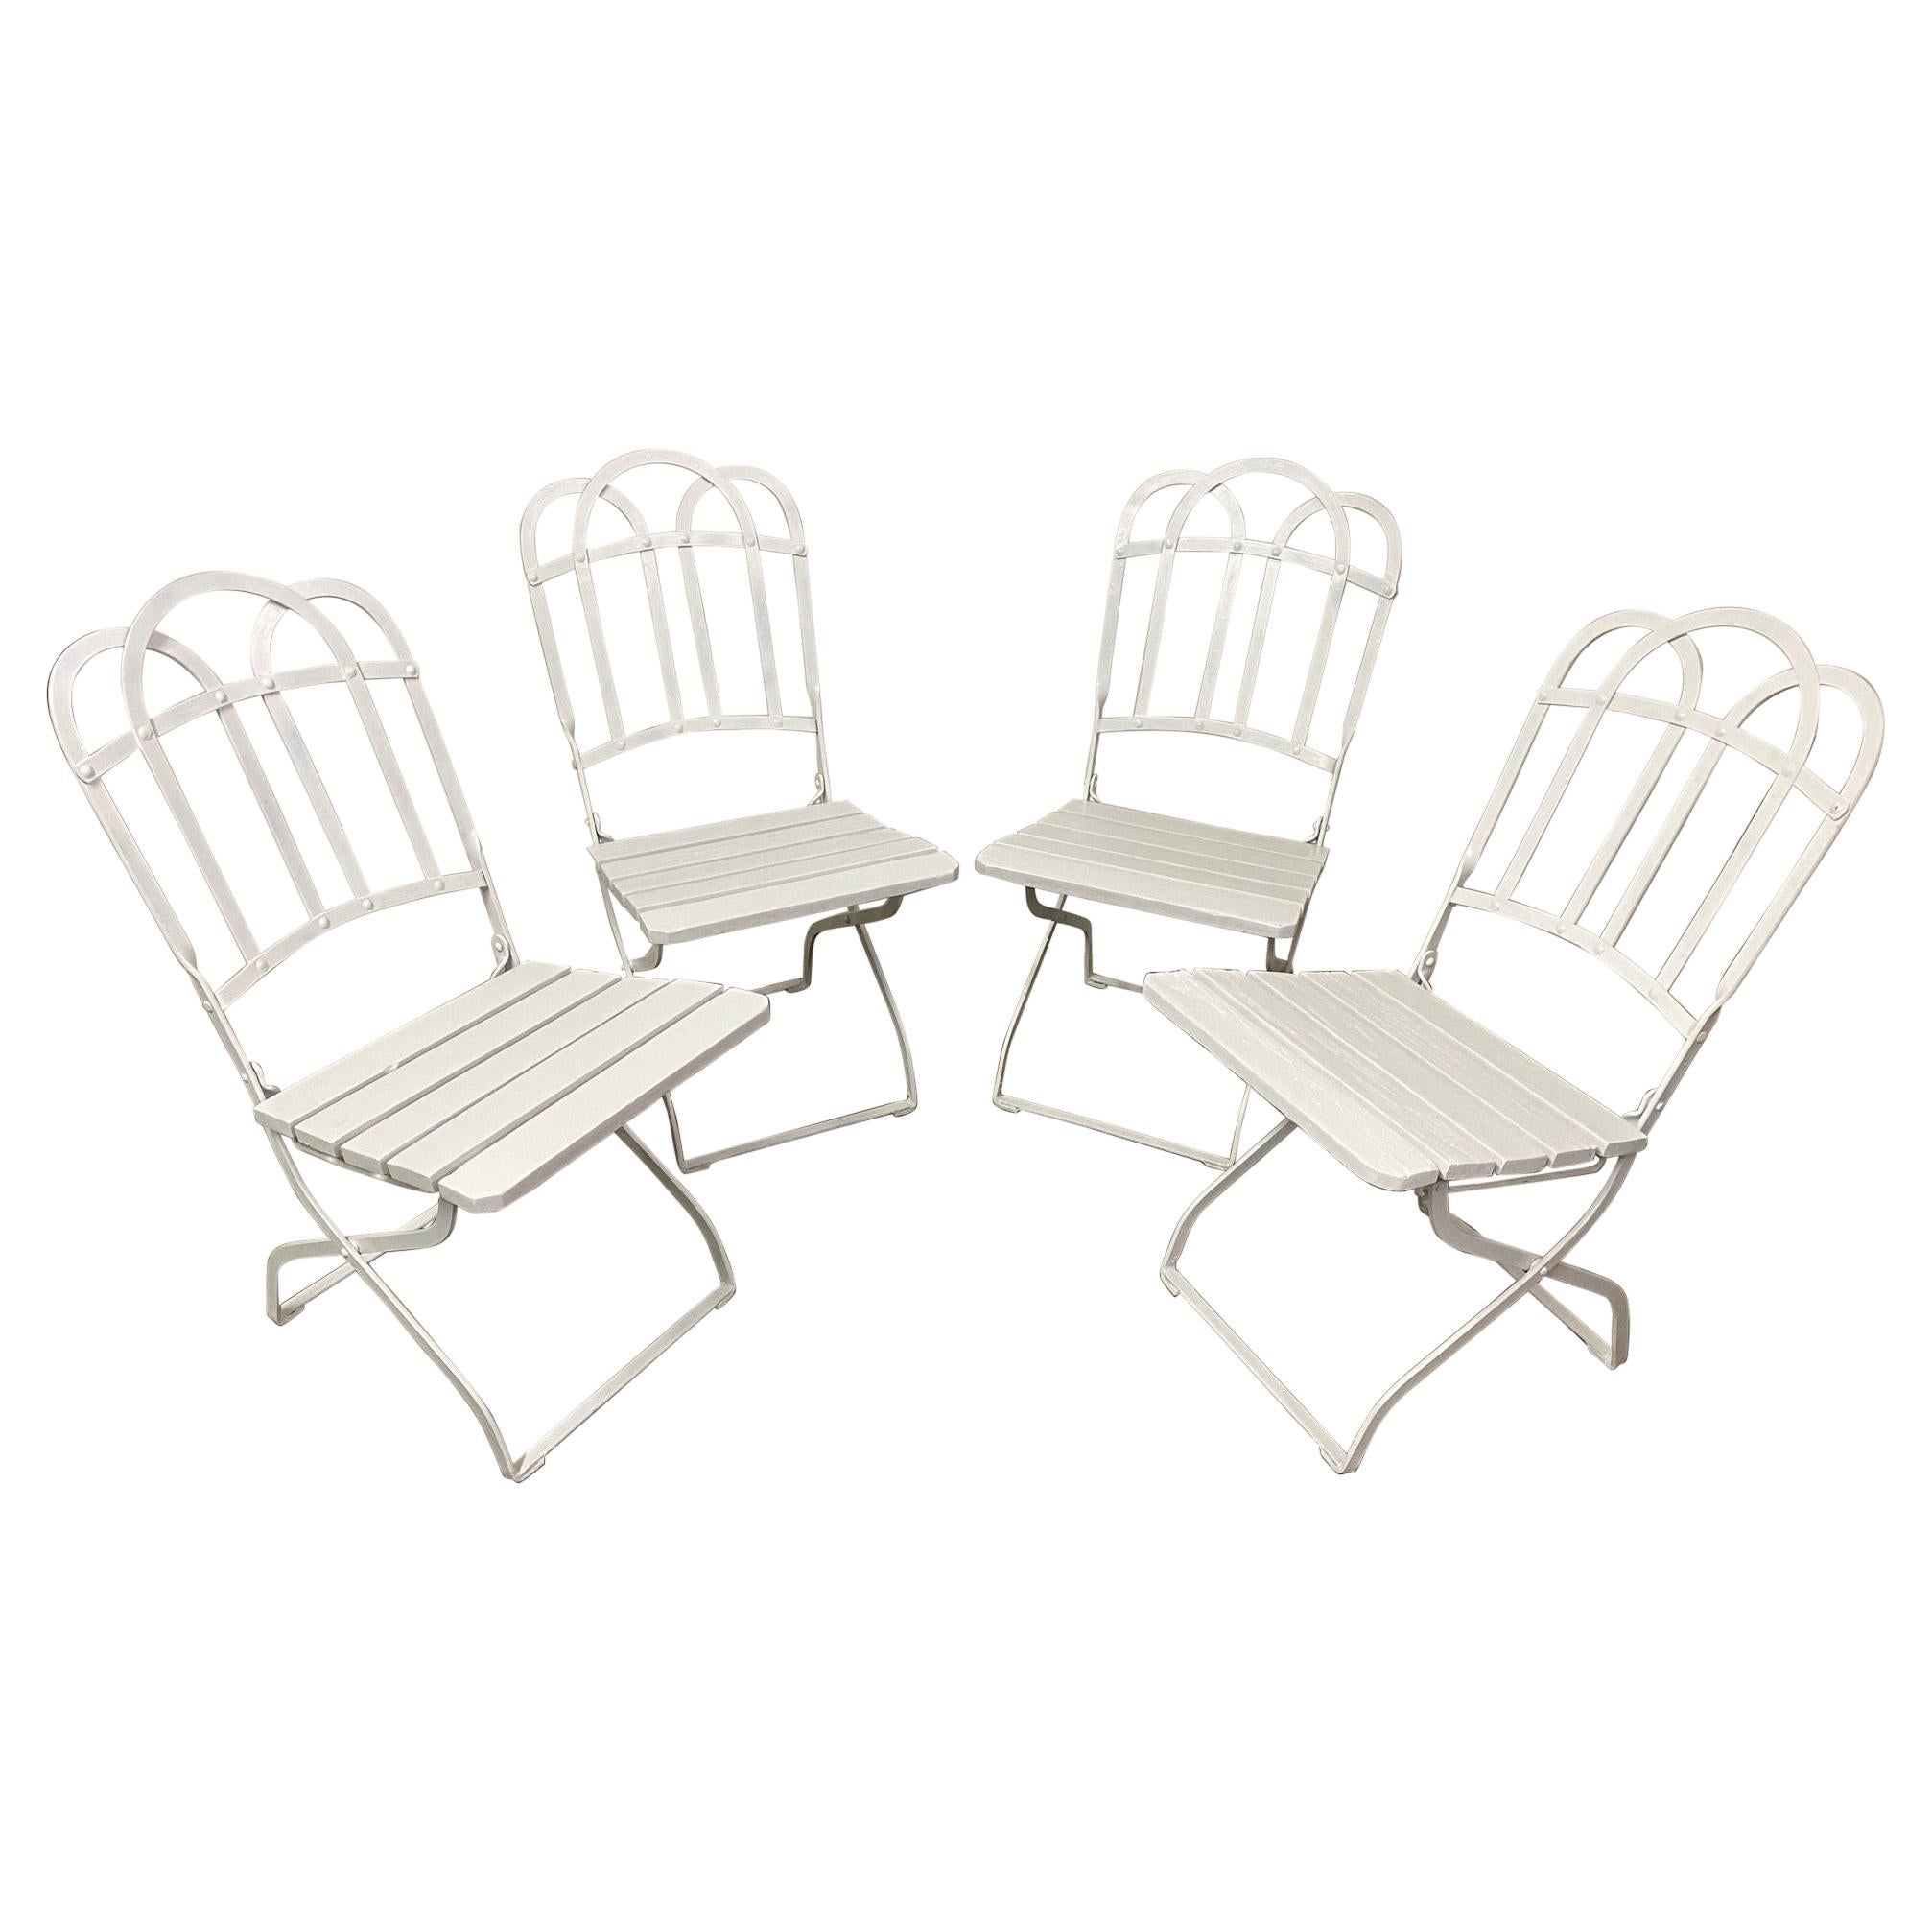 Antique French Garden Folding Dining Chairs